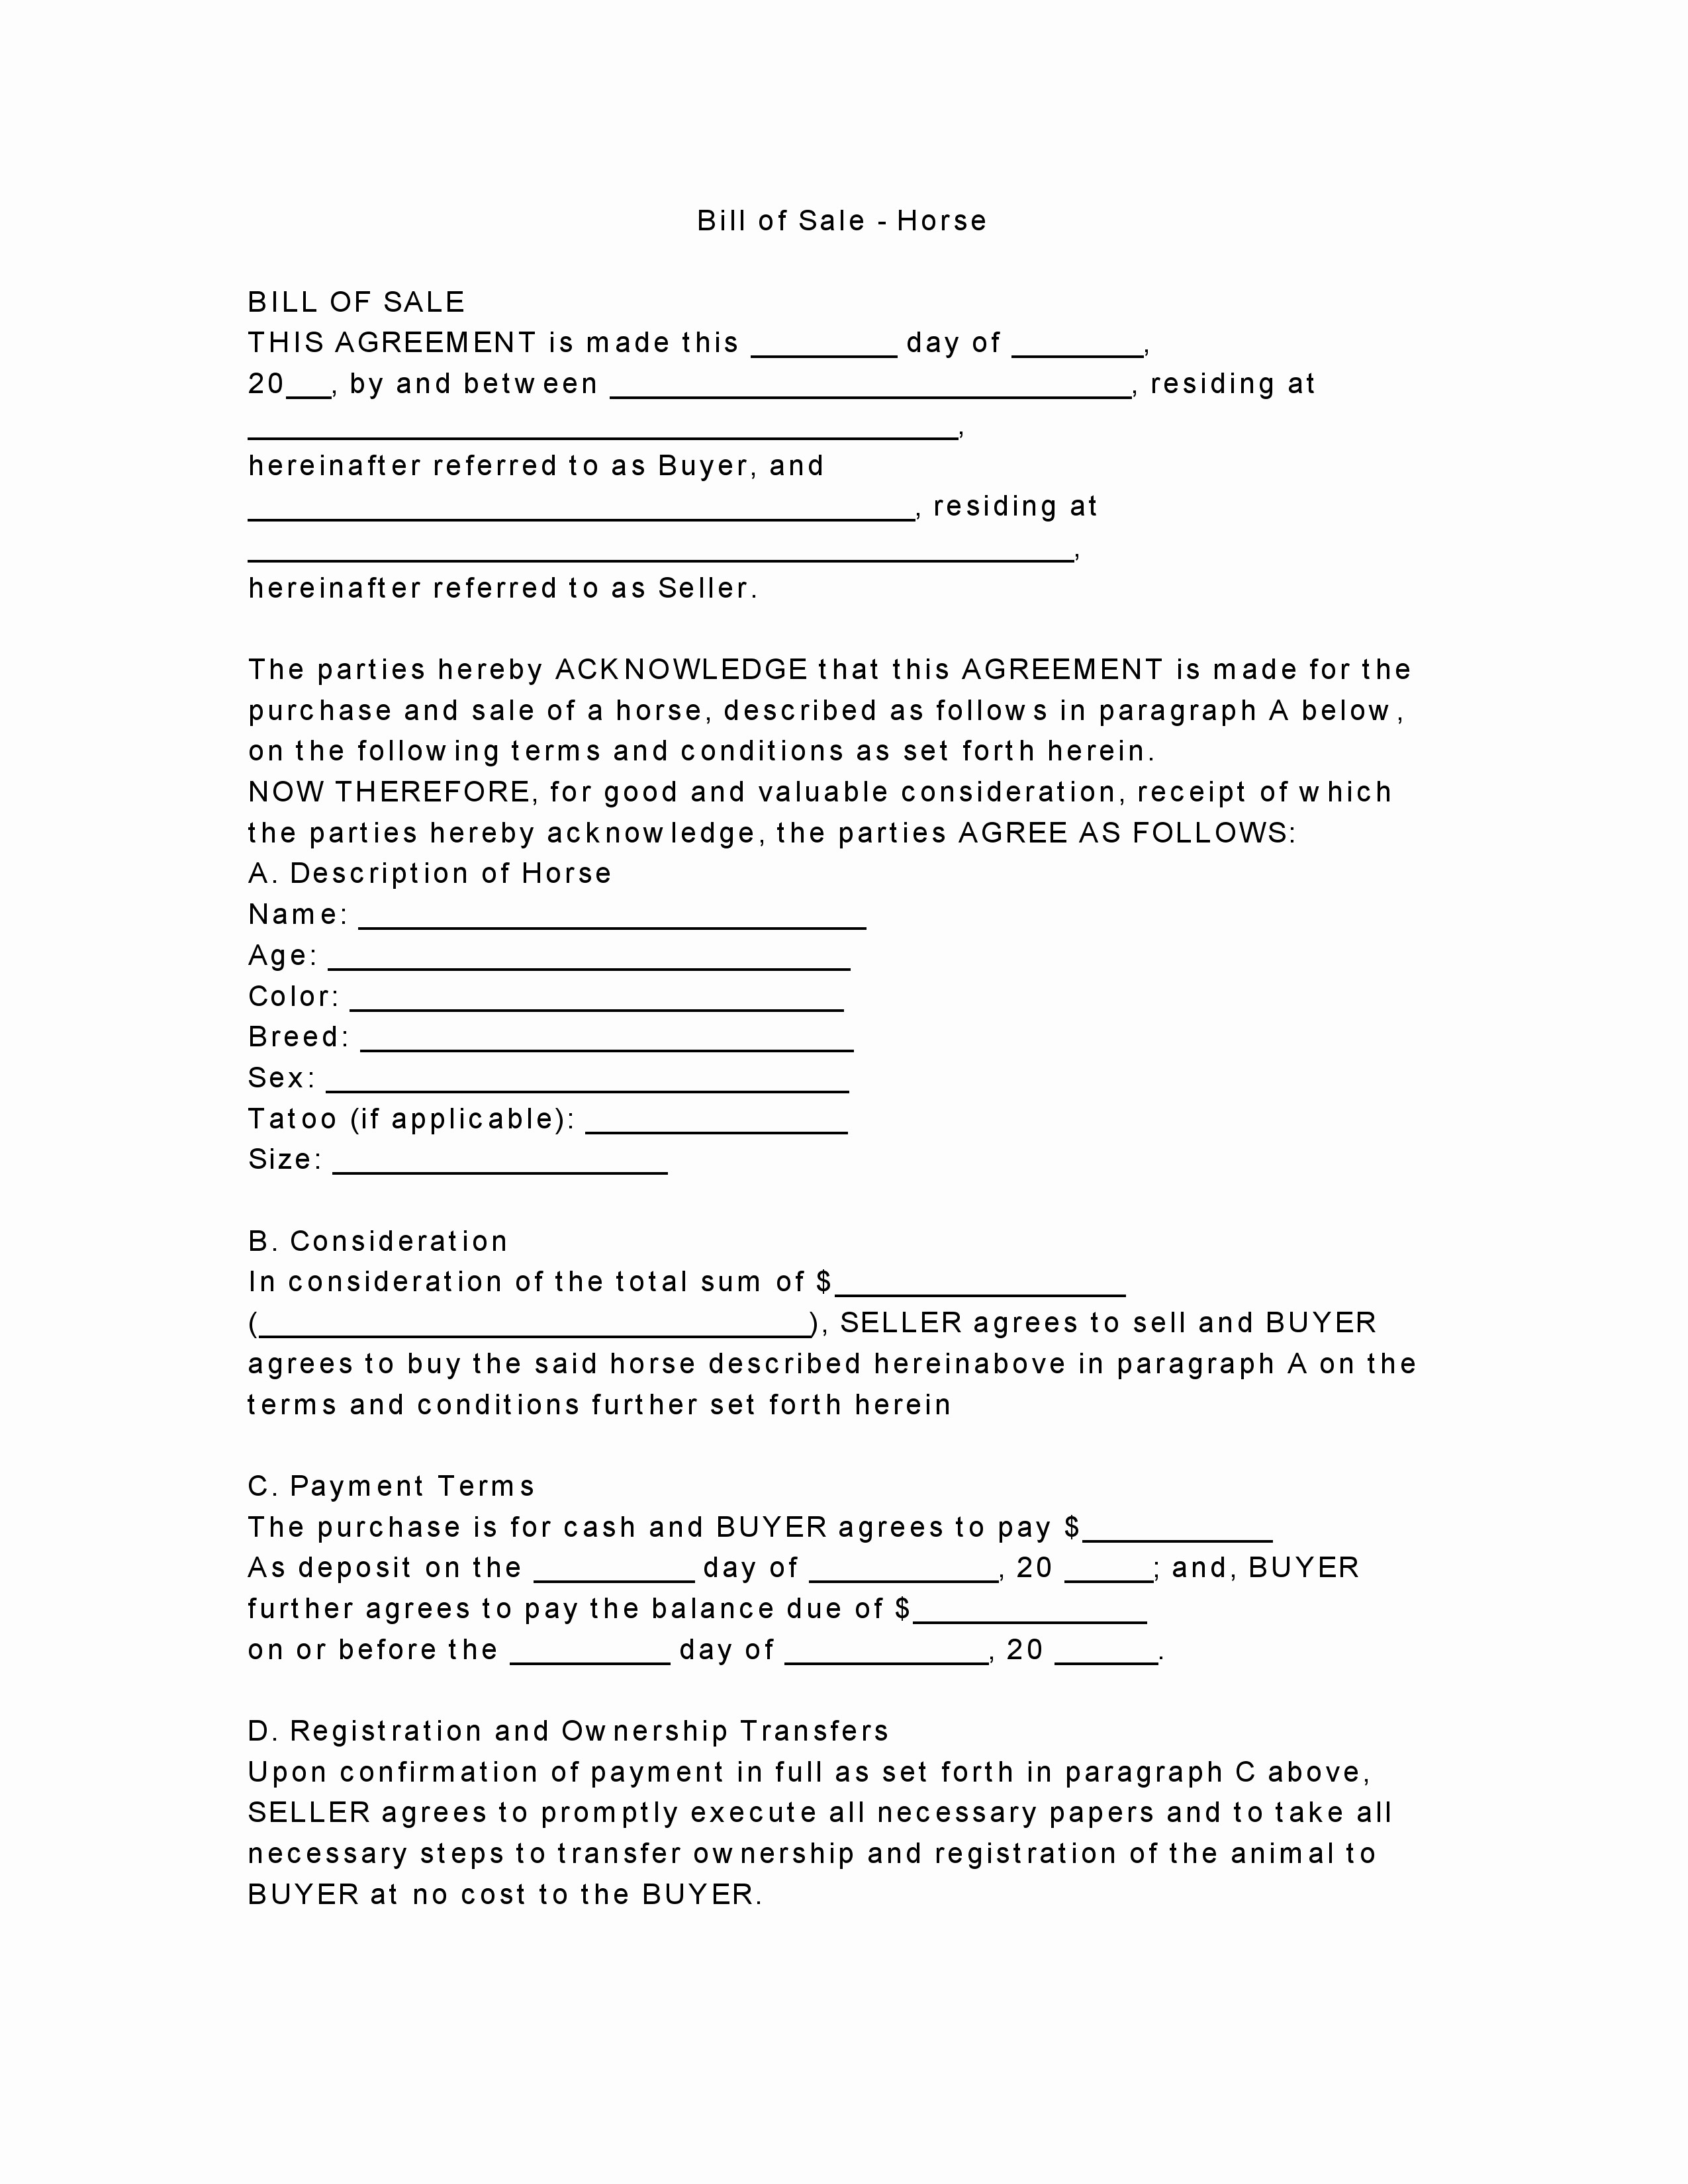 Bill Of Sale Payment Agreement Fresh Free Horse Bill Of Sale form Pdf